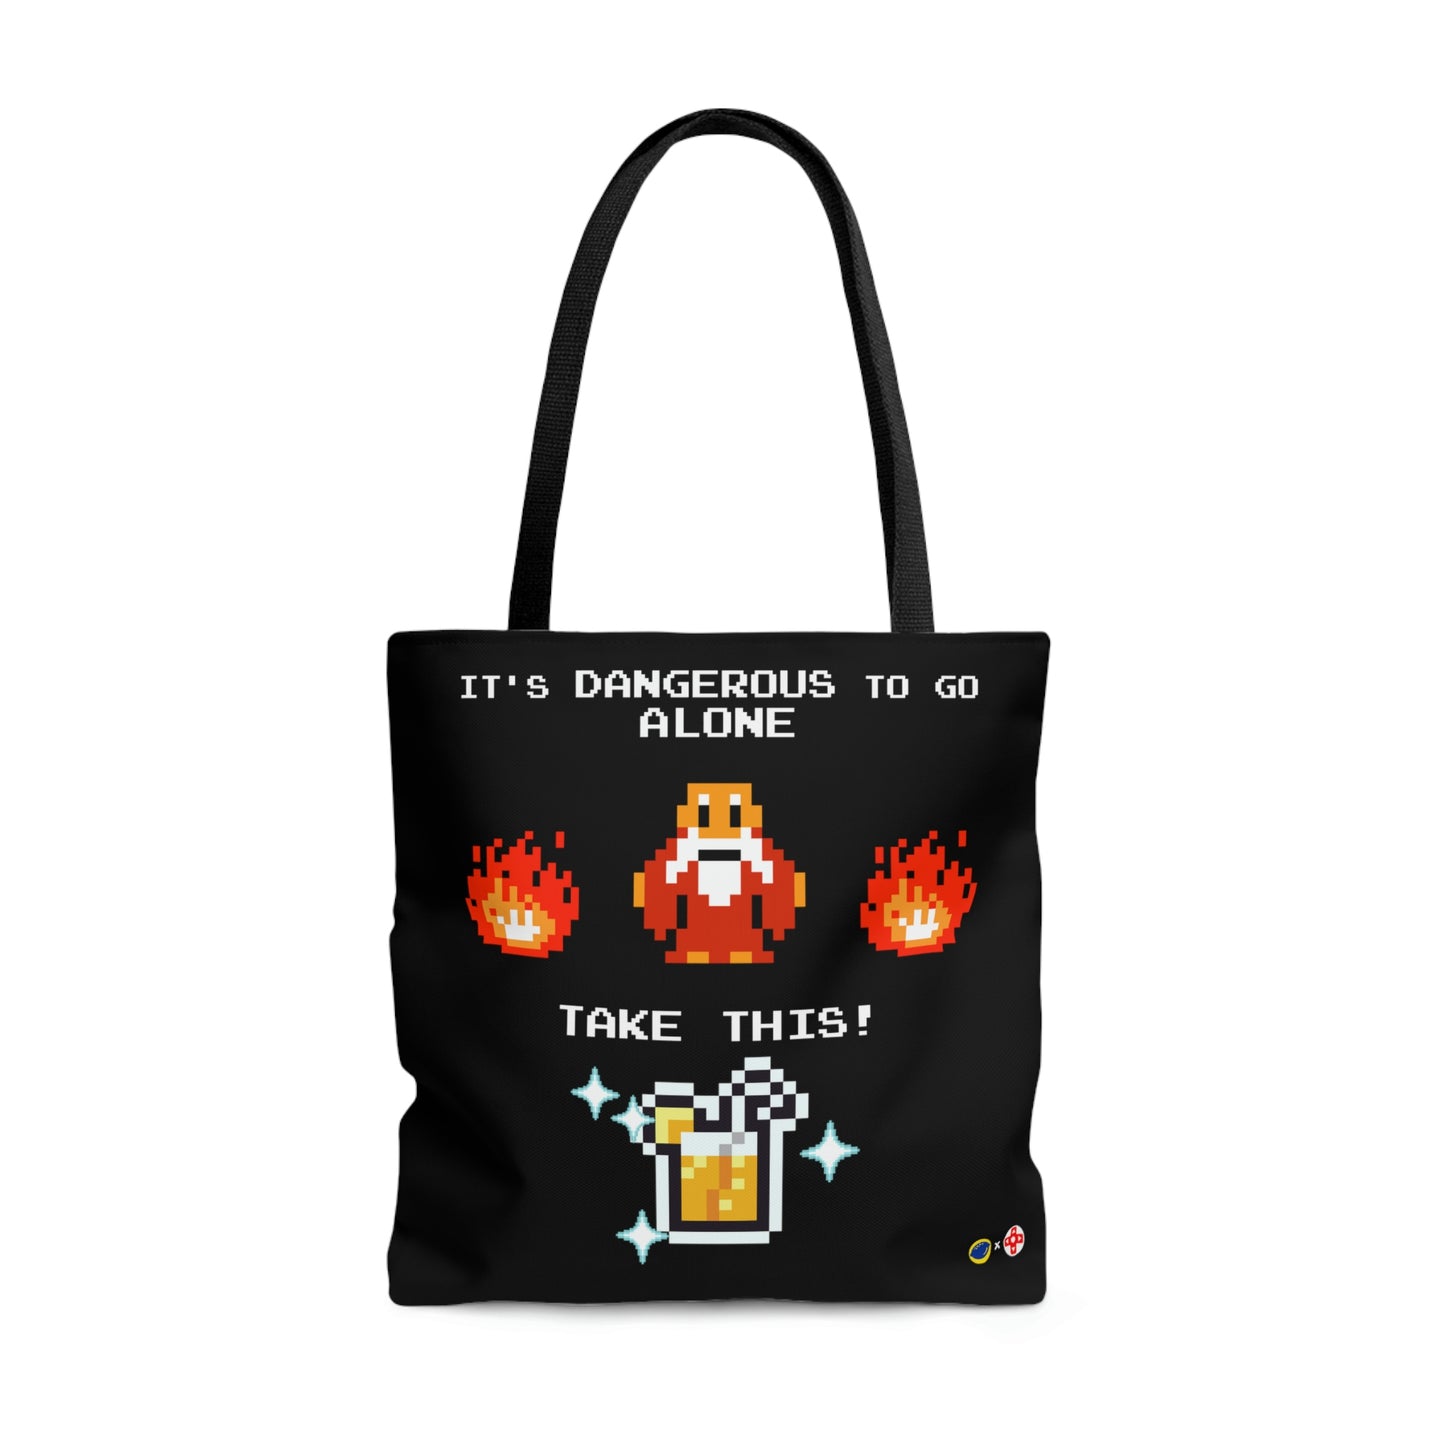 ALS x GSF Tote Bag - It's Dangerous to go Alone